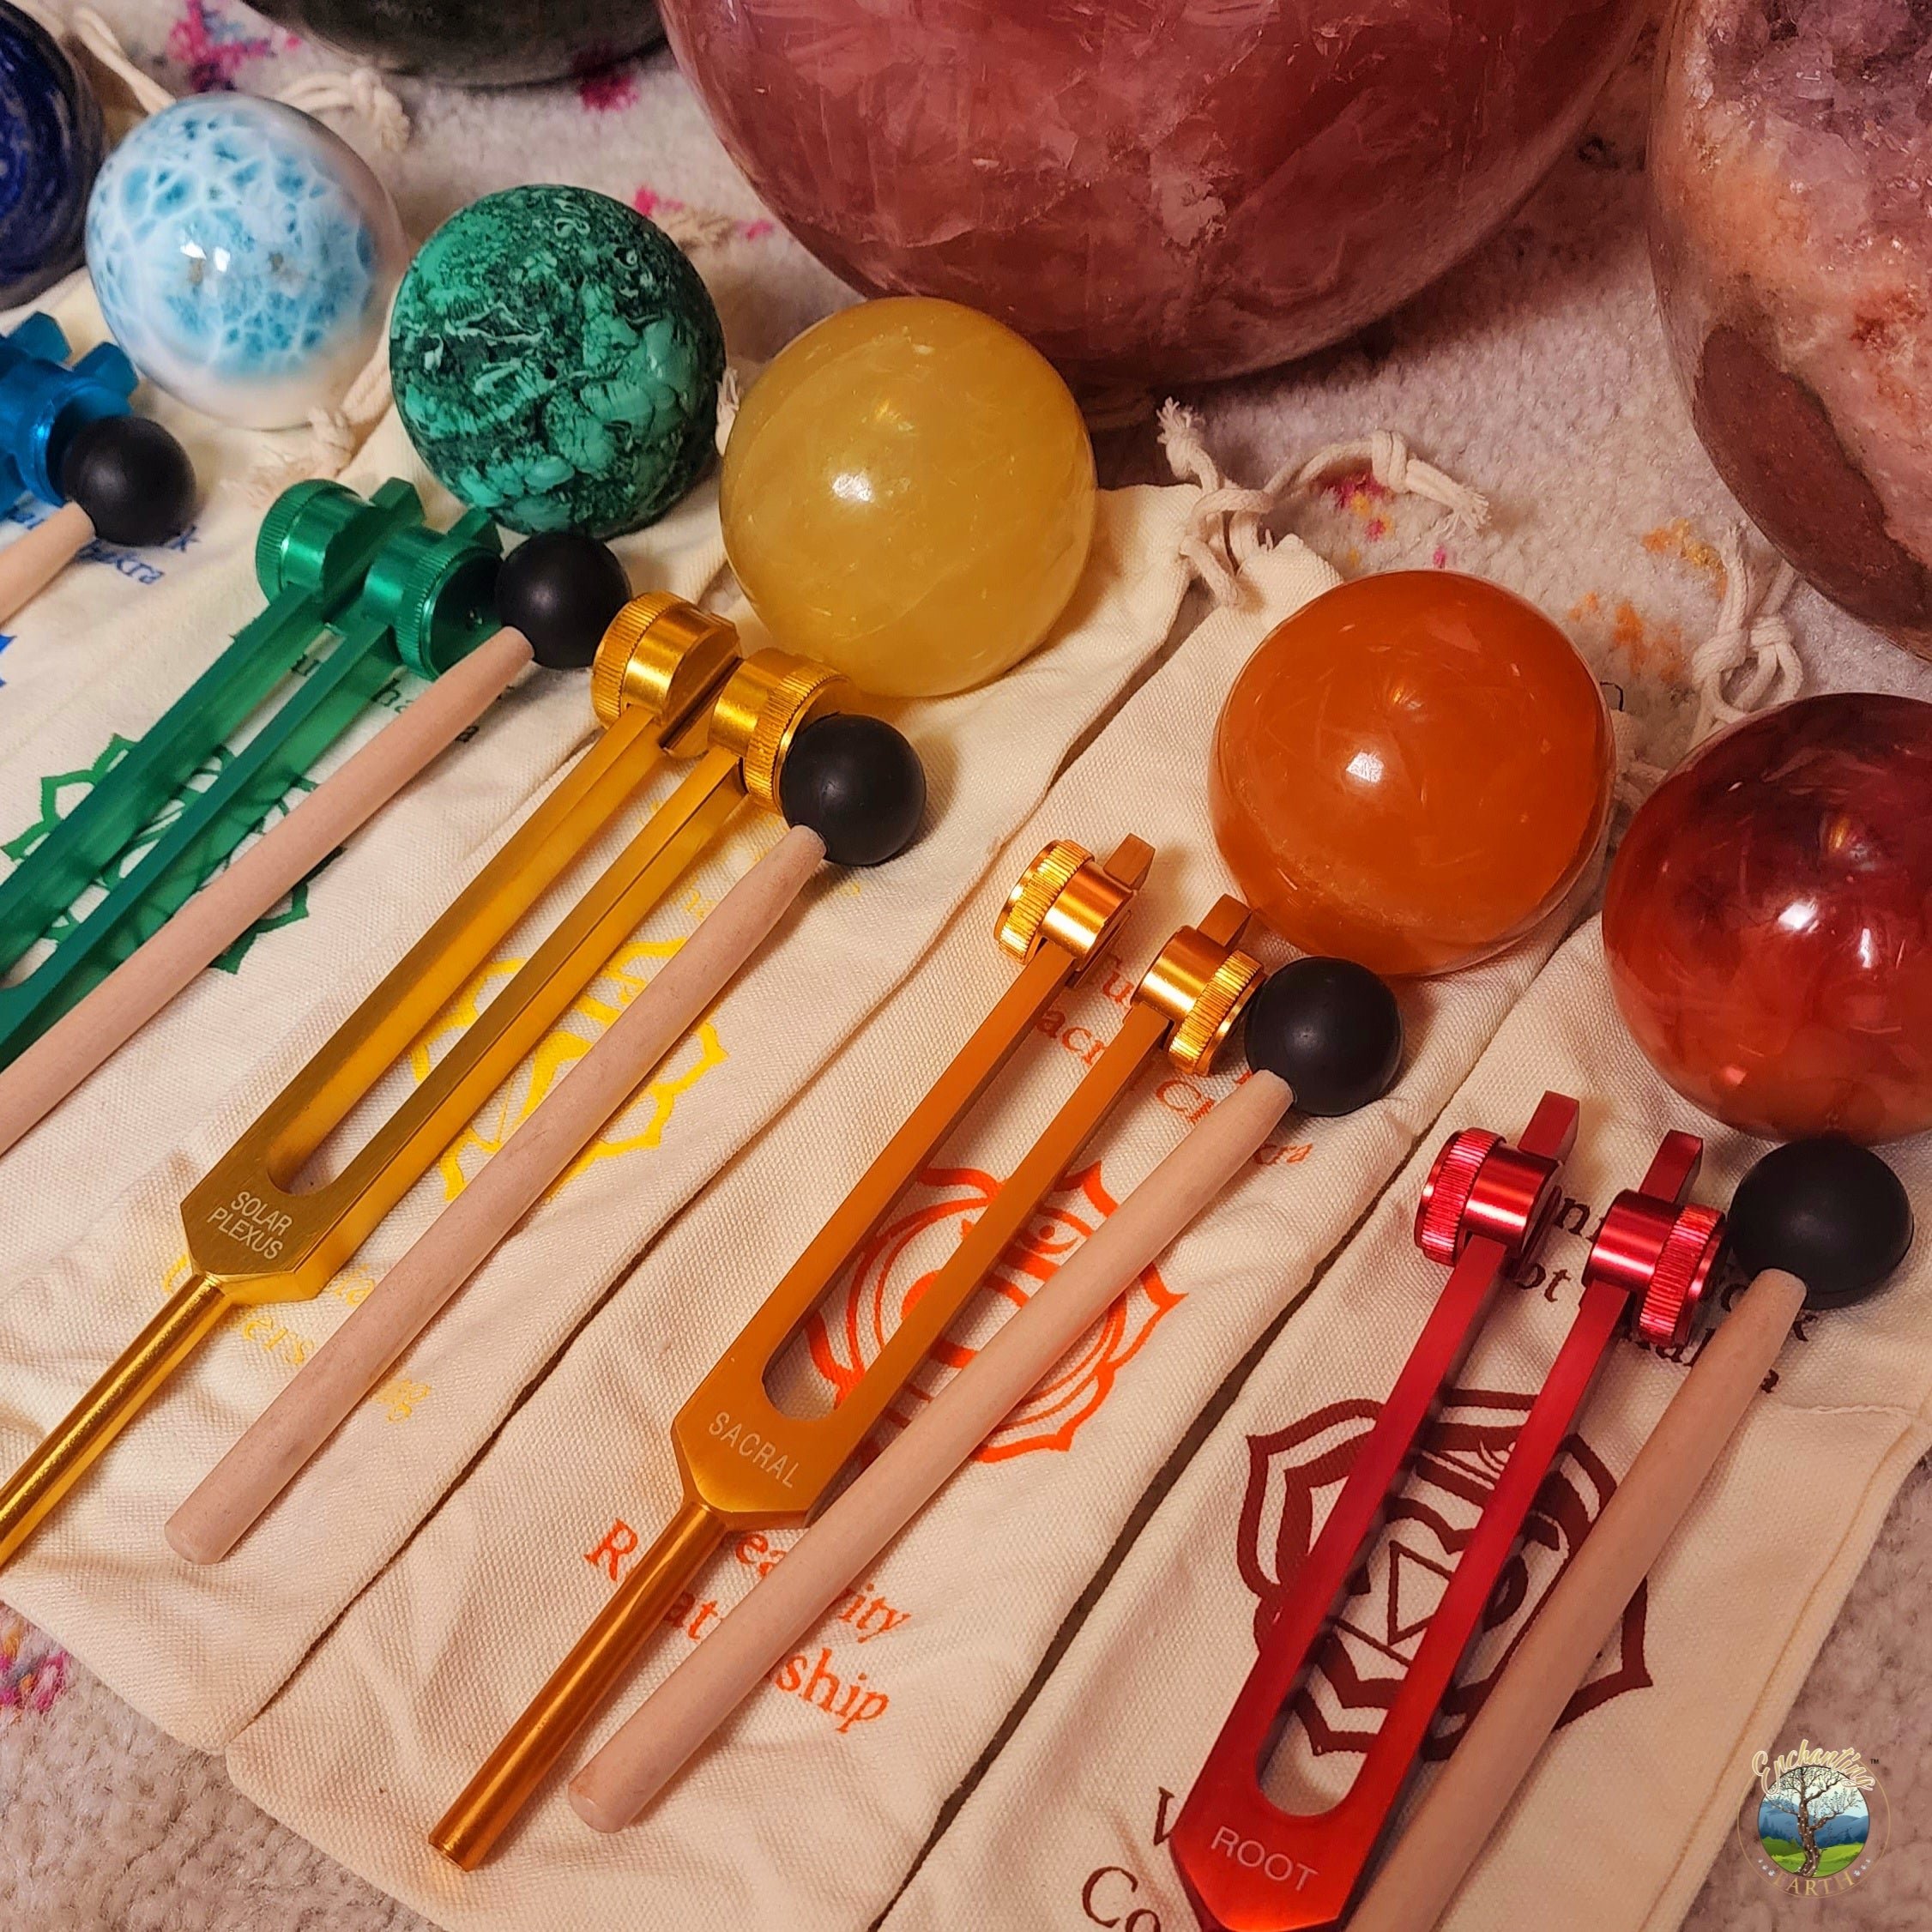 Chakra Tuning Fork Set for Balance, Sound Healing and Wellbeing